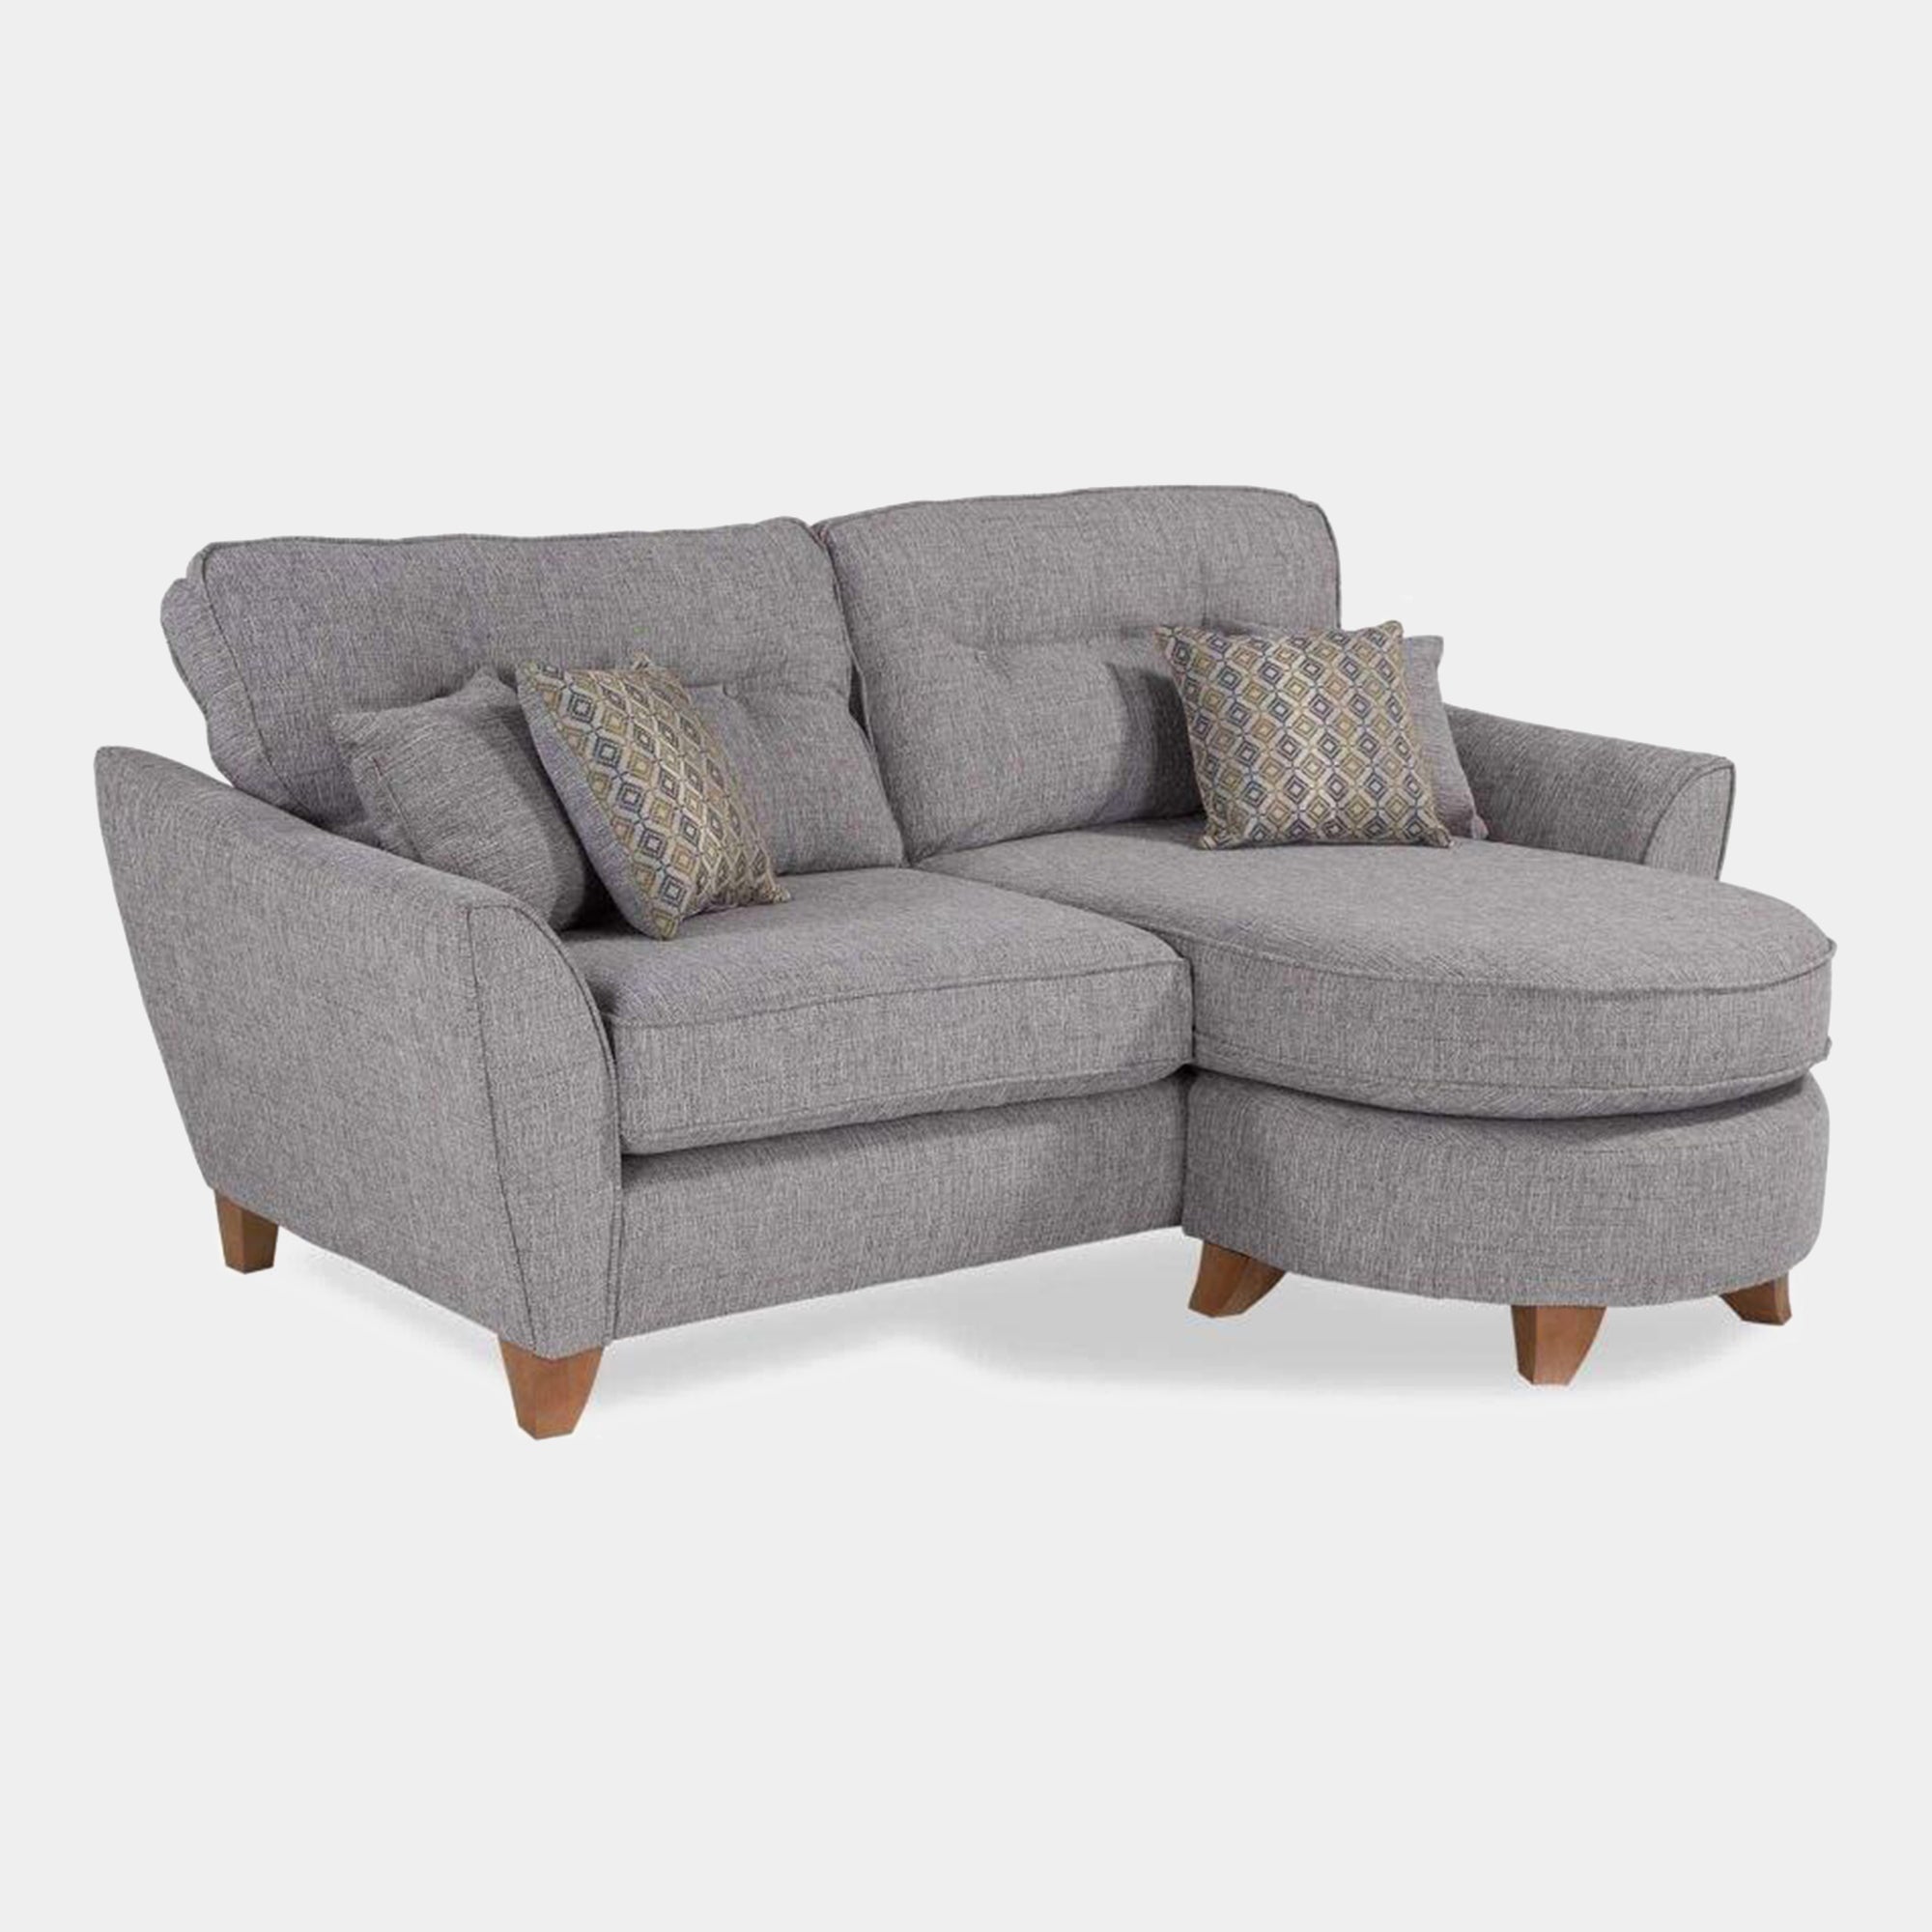 Isabelle - 3 Seater Lounger Sofa In Fabric Brooklyn